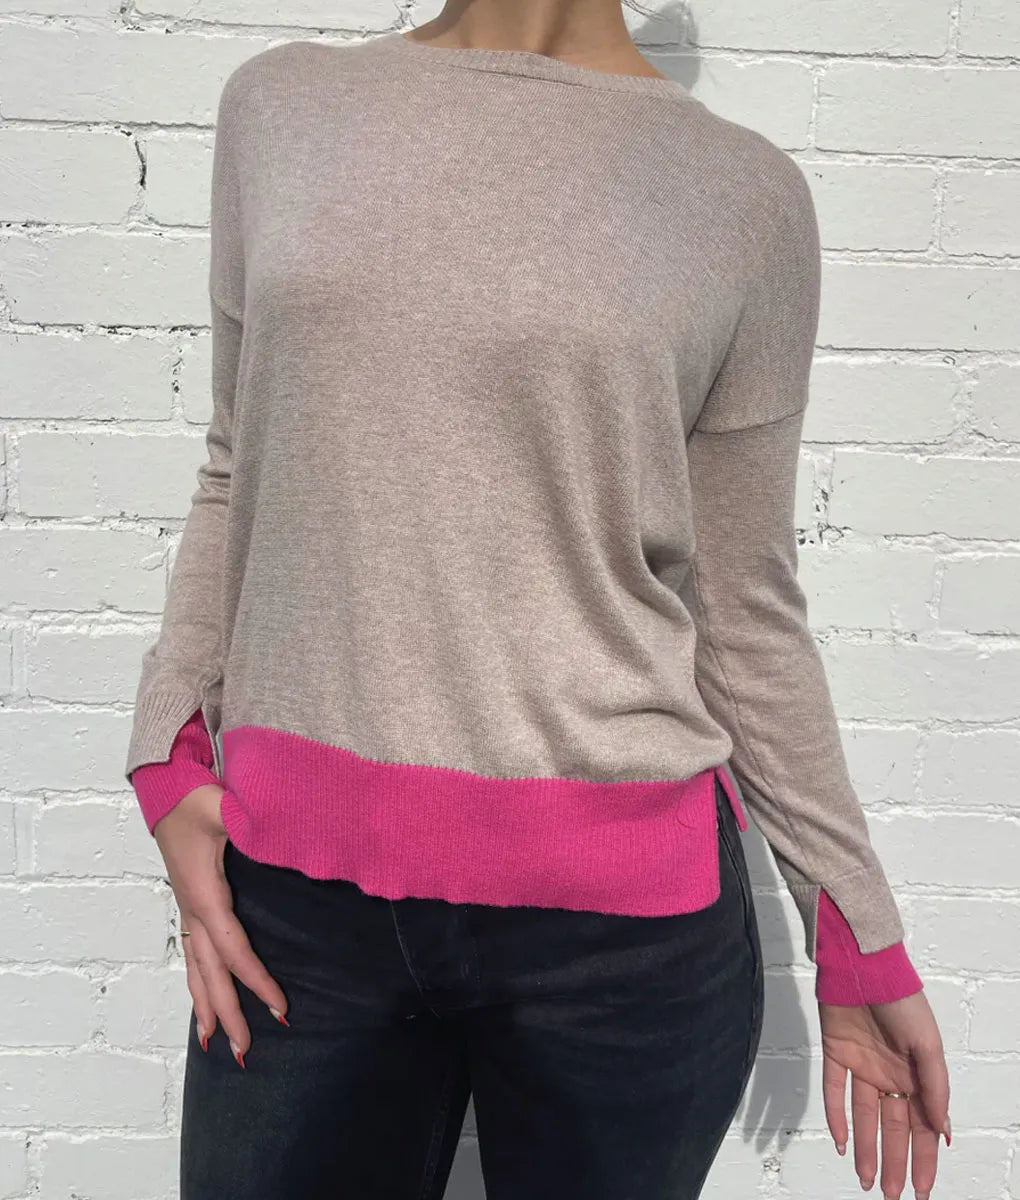 Sophie Moran - Oatmeal/Pink Arm Patch Sweater